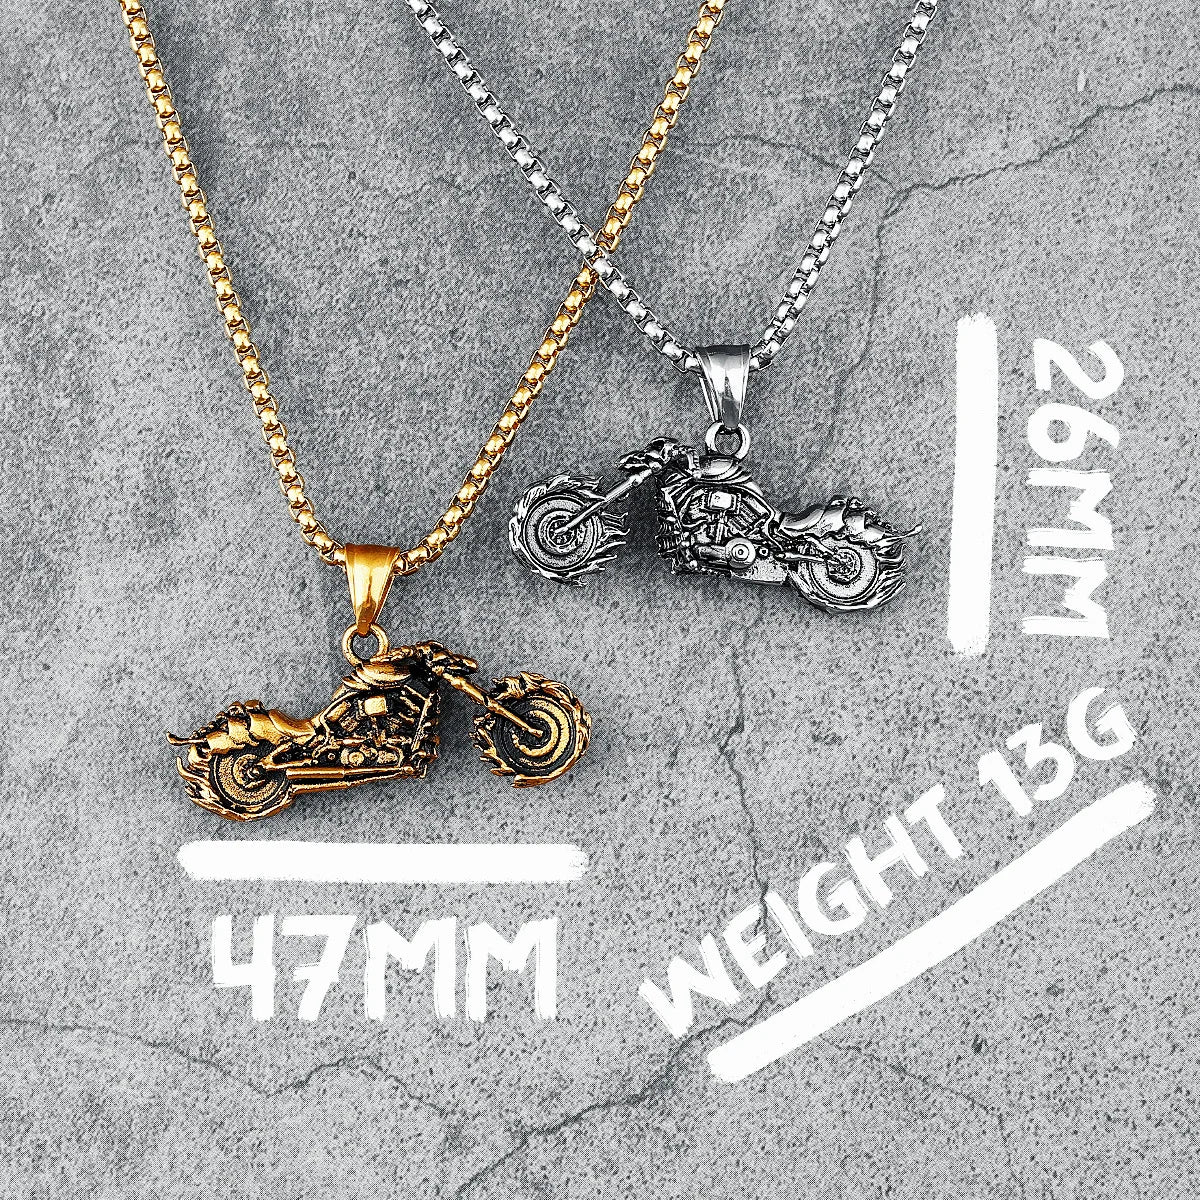 Stainless Steel Motorcycle Necklace